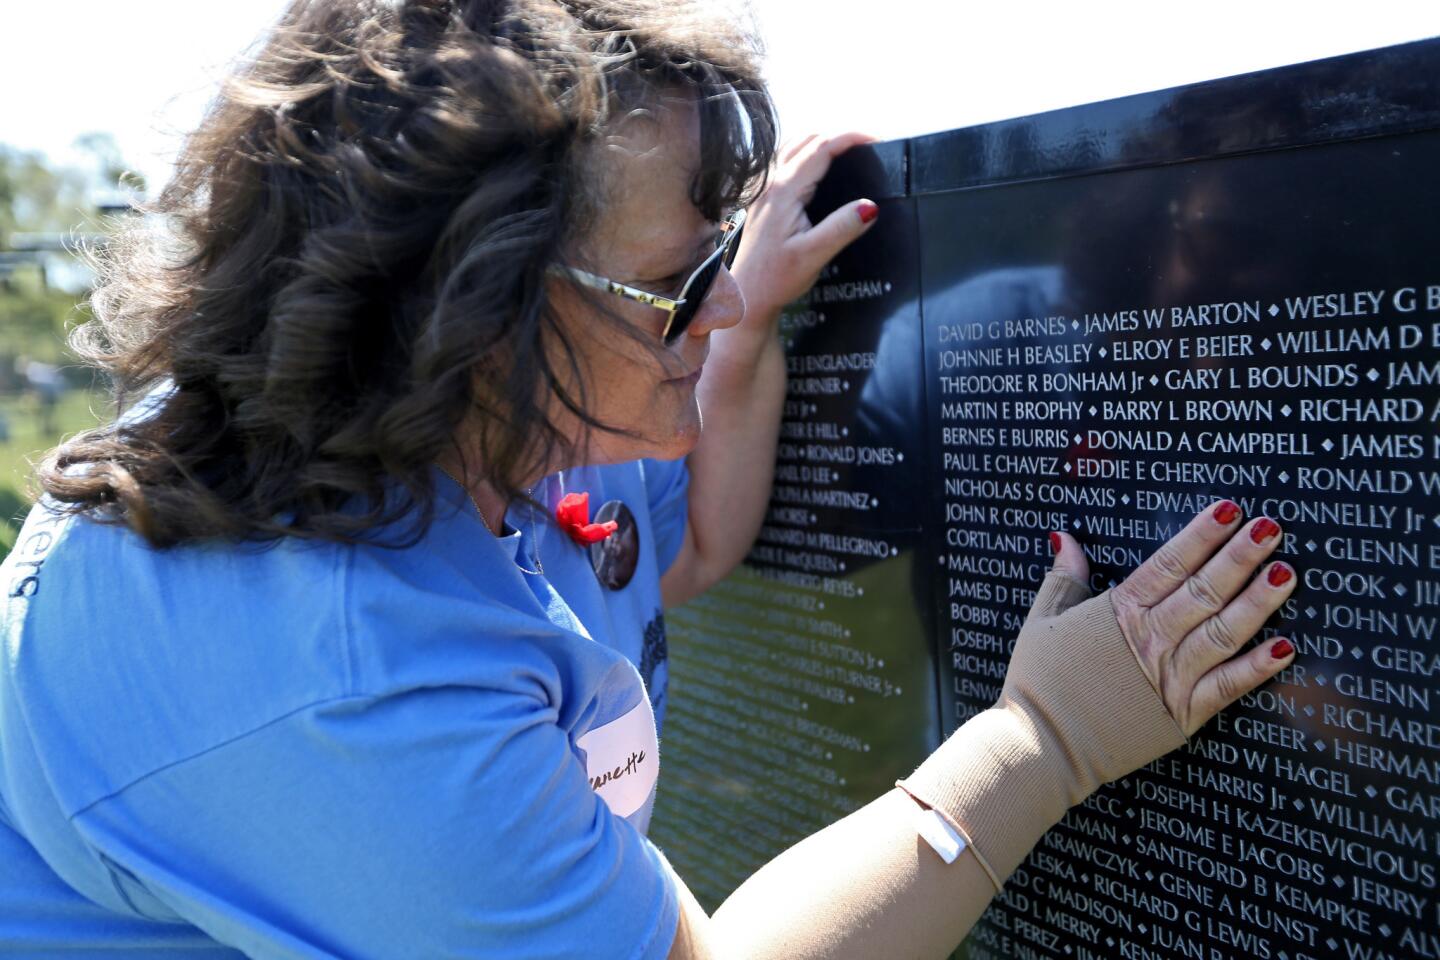 Jeanette Chervony, 52, of Costa Mesa points to her father Eddie Chervony's name on the traveling replica of the Vietnam Veterans Memorial Wall, at Estancia Park in Costa Mesa on Wednesday. Chervony was 13 months old when her father, a member of the U.S. Army 77th Field Artillery, was killed in combat on May 5, 1968 at age 21.